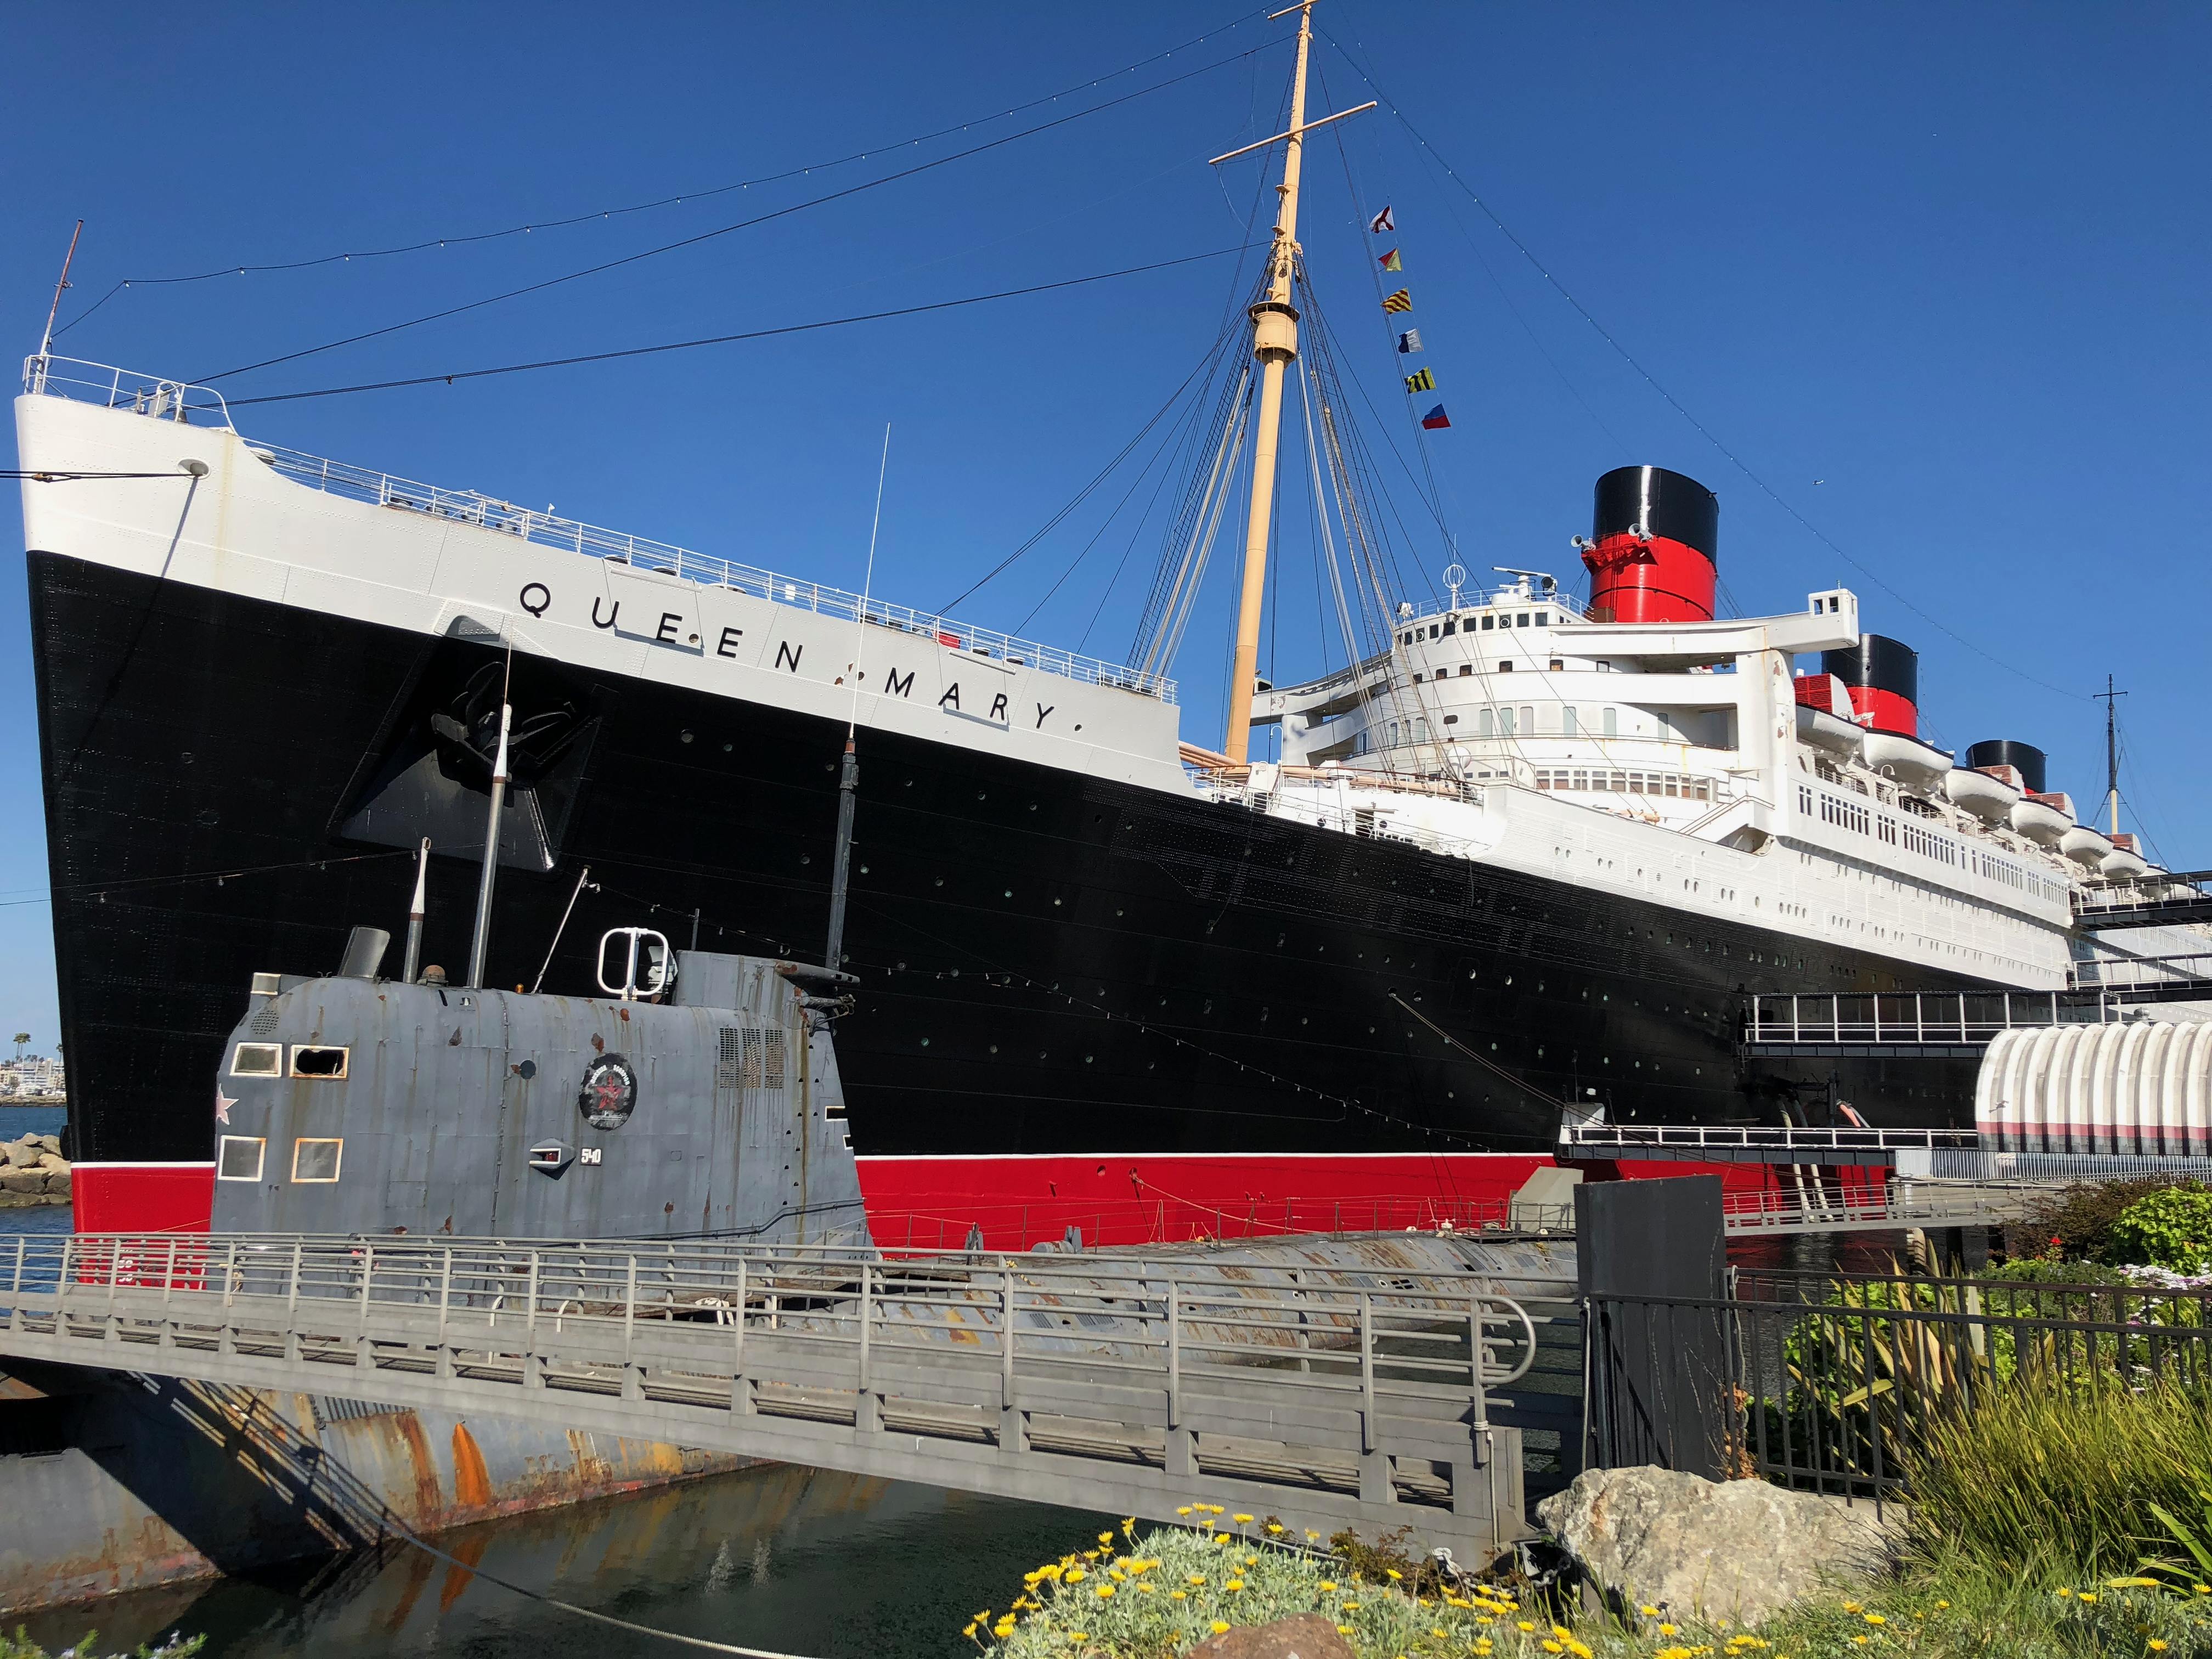 View of the RMS Queen Mary